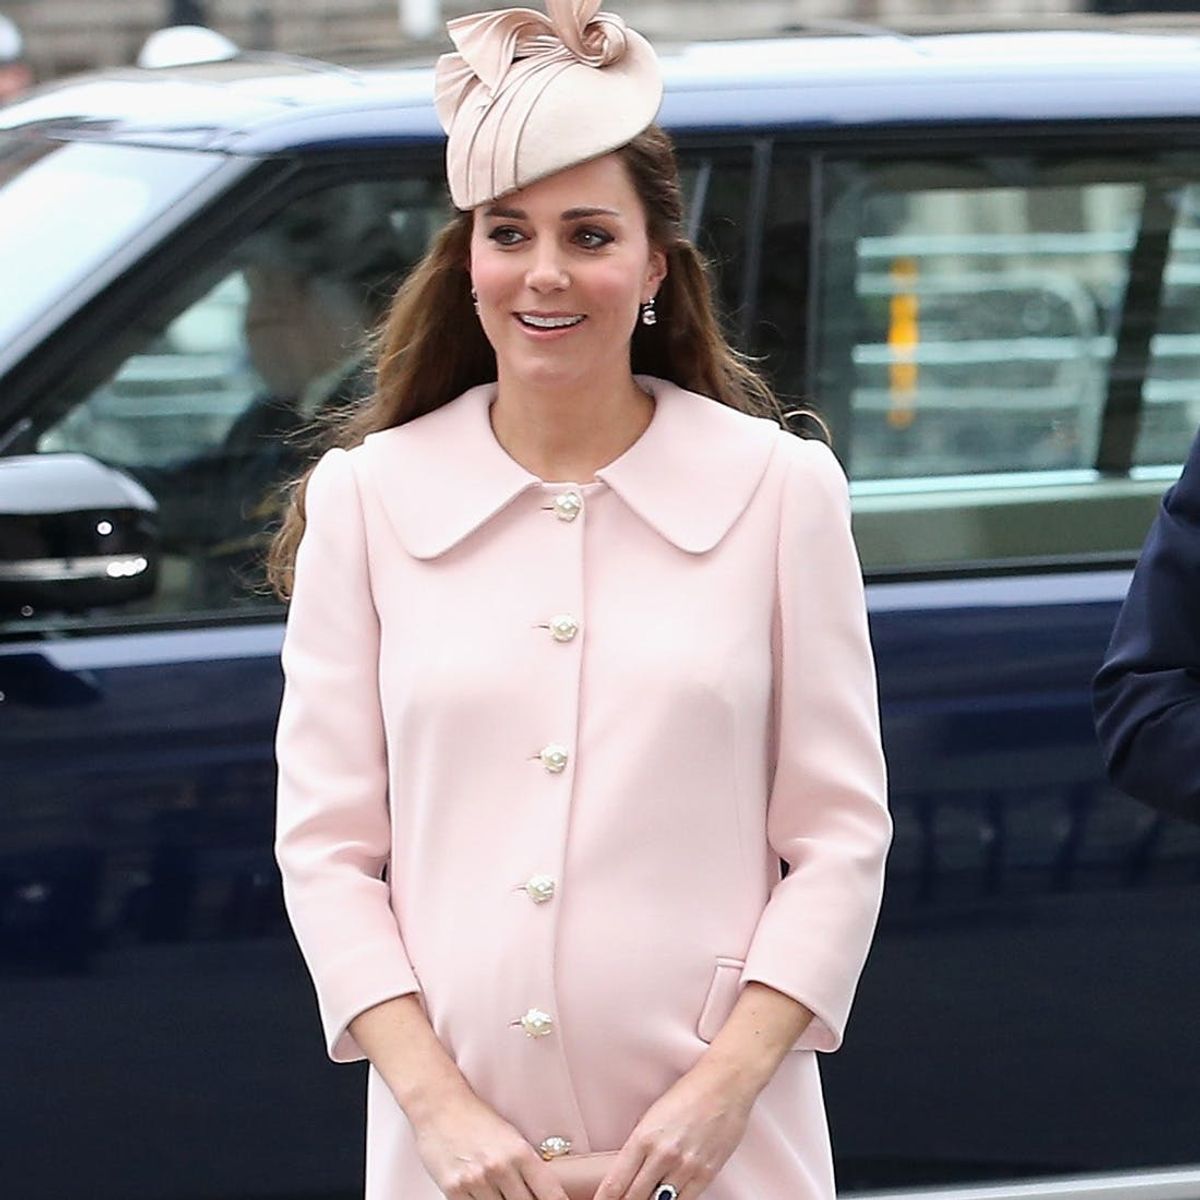 Now You Can Shop Kate Middleton’s Fave Maternity Brand